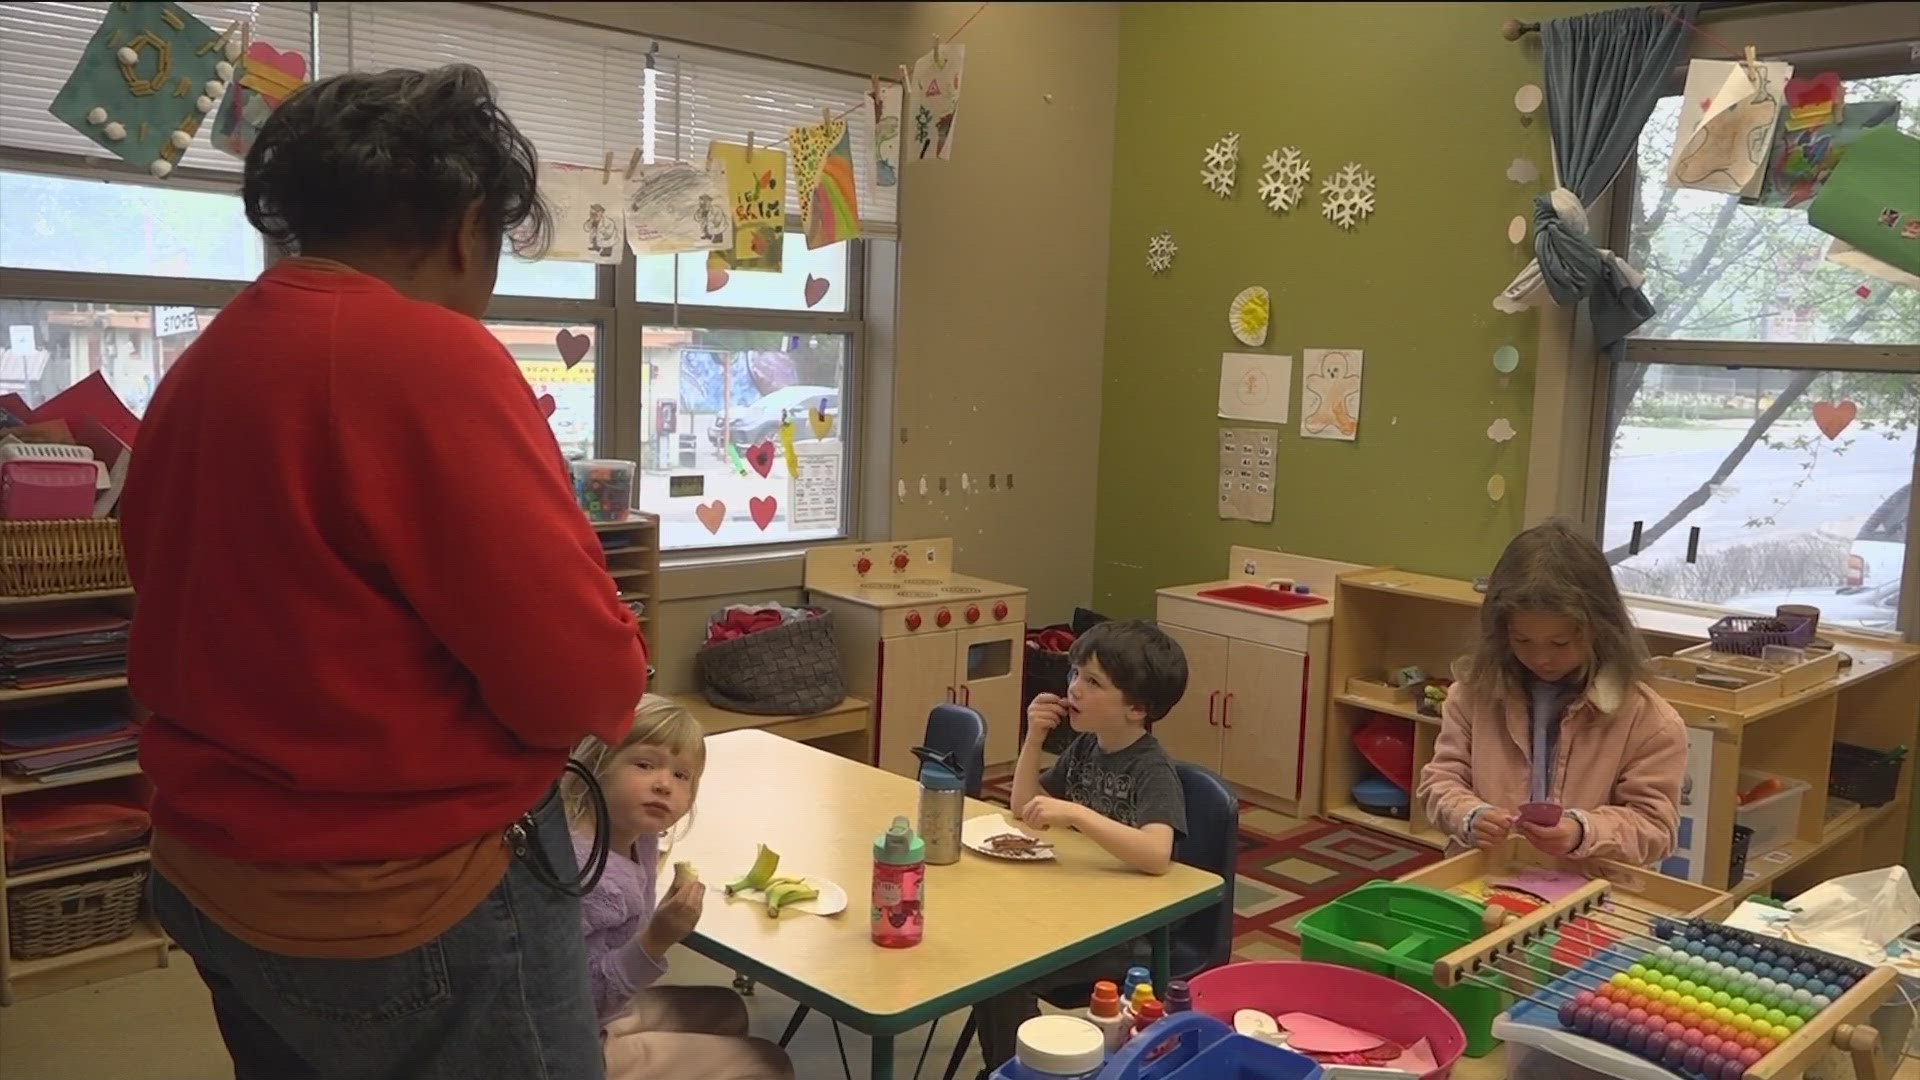 Finding child care in Central Texas is becoming almost impossible for many parents. Lack of affordable options and long waitlists are some of the reasons why.